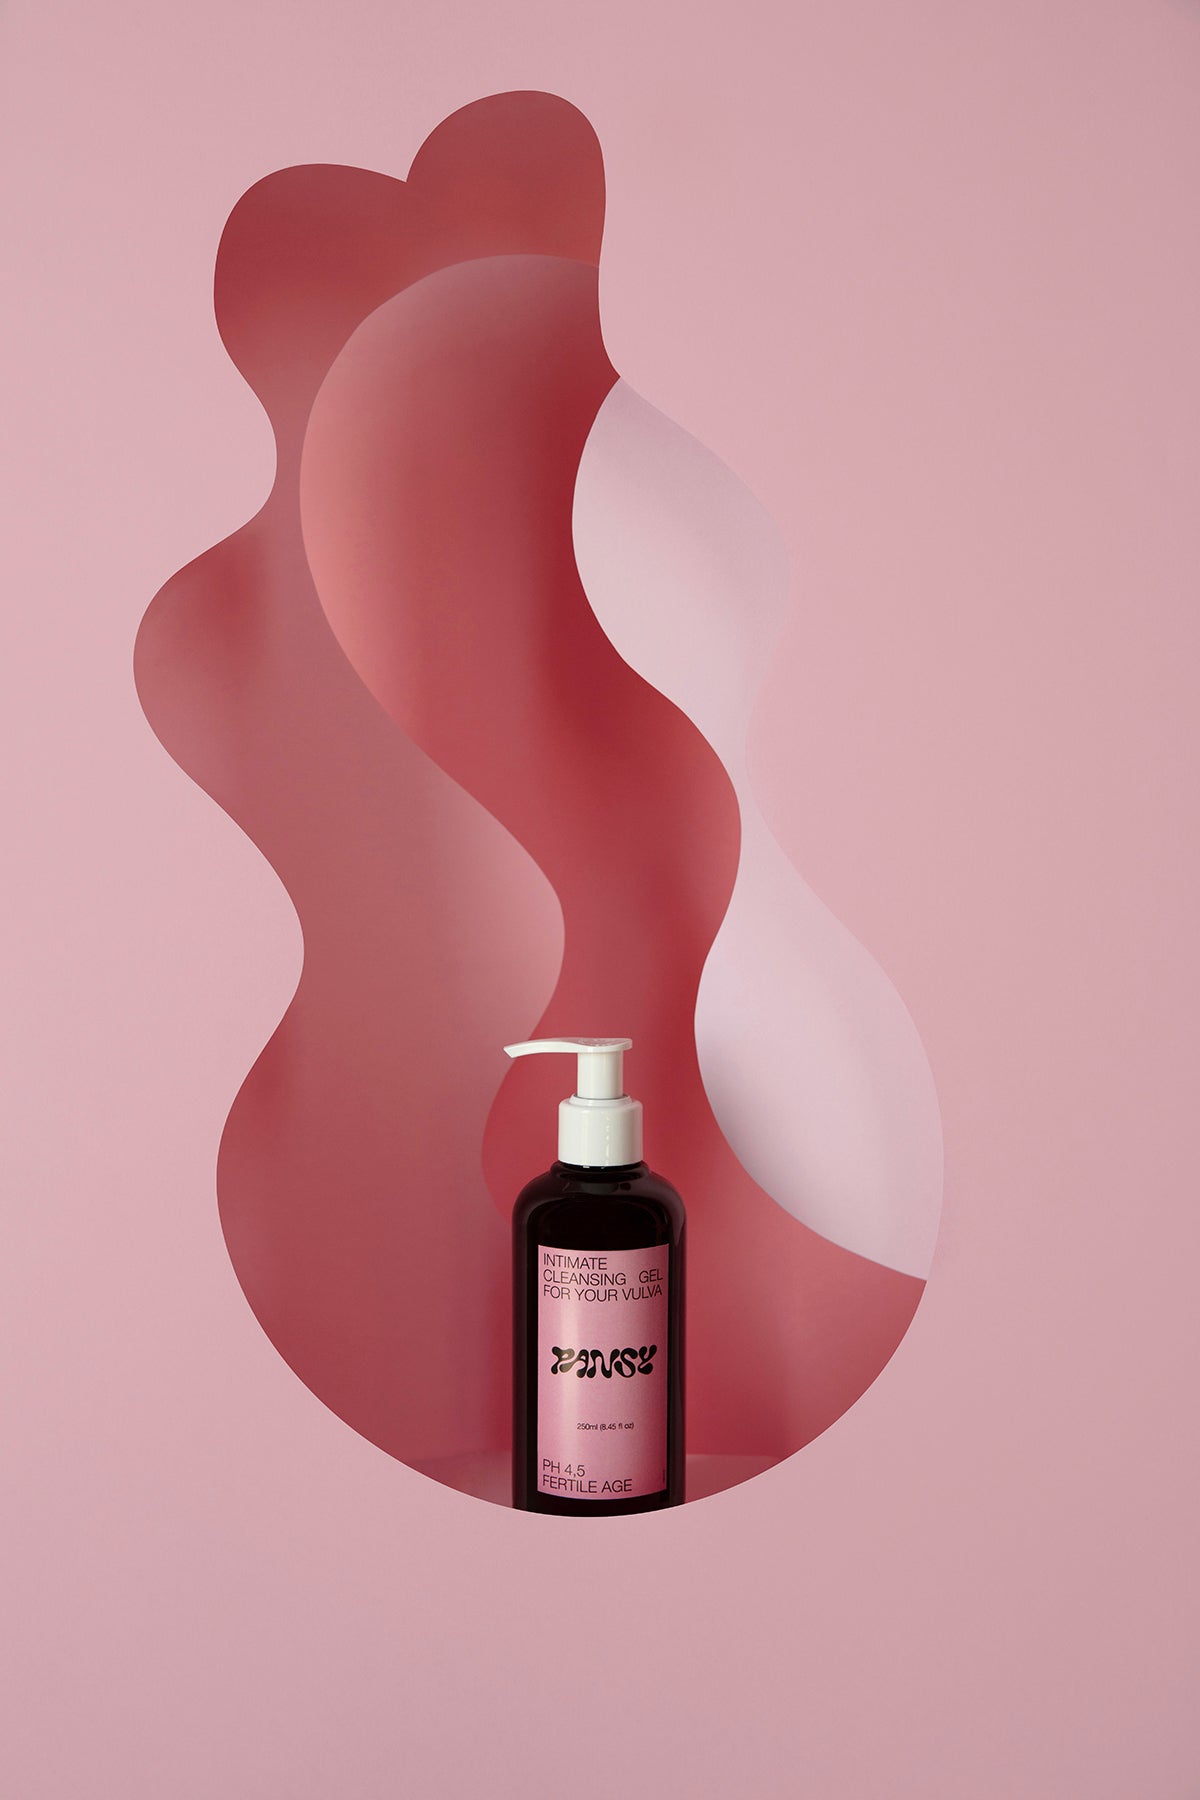 INTIMATE CLEANSING GEL FOR YOUR VULVA (pH 4.5 - fertile age)